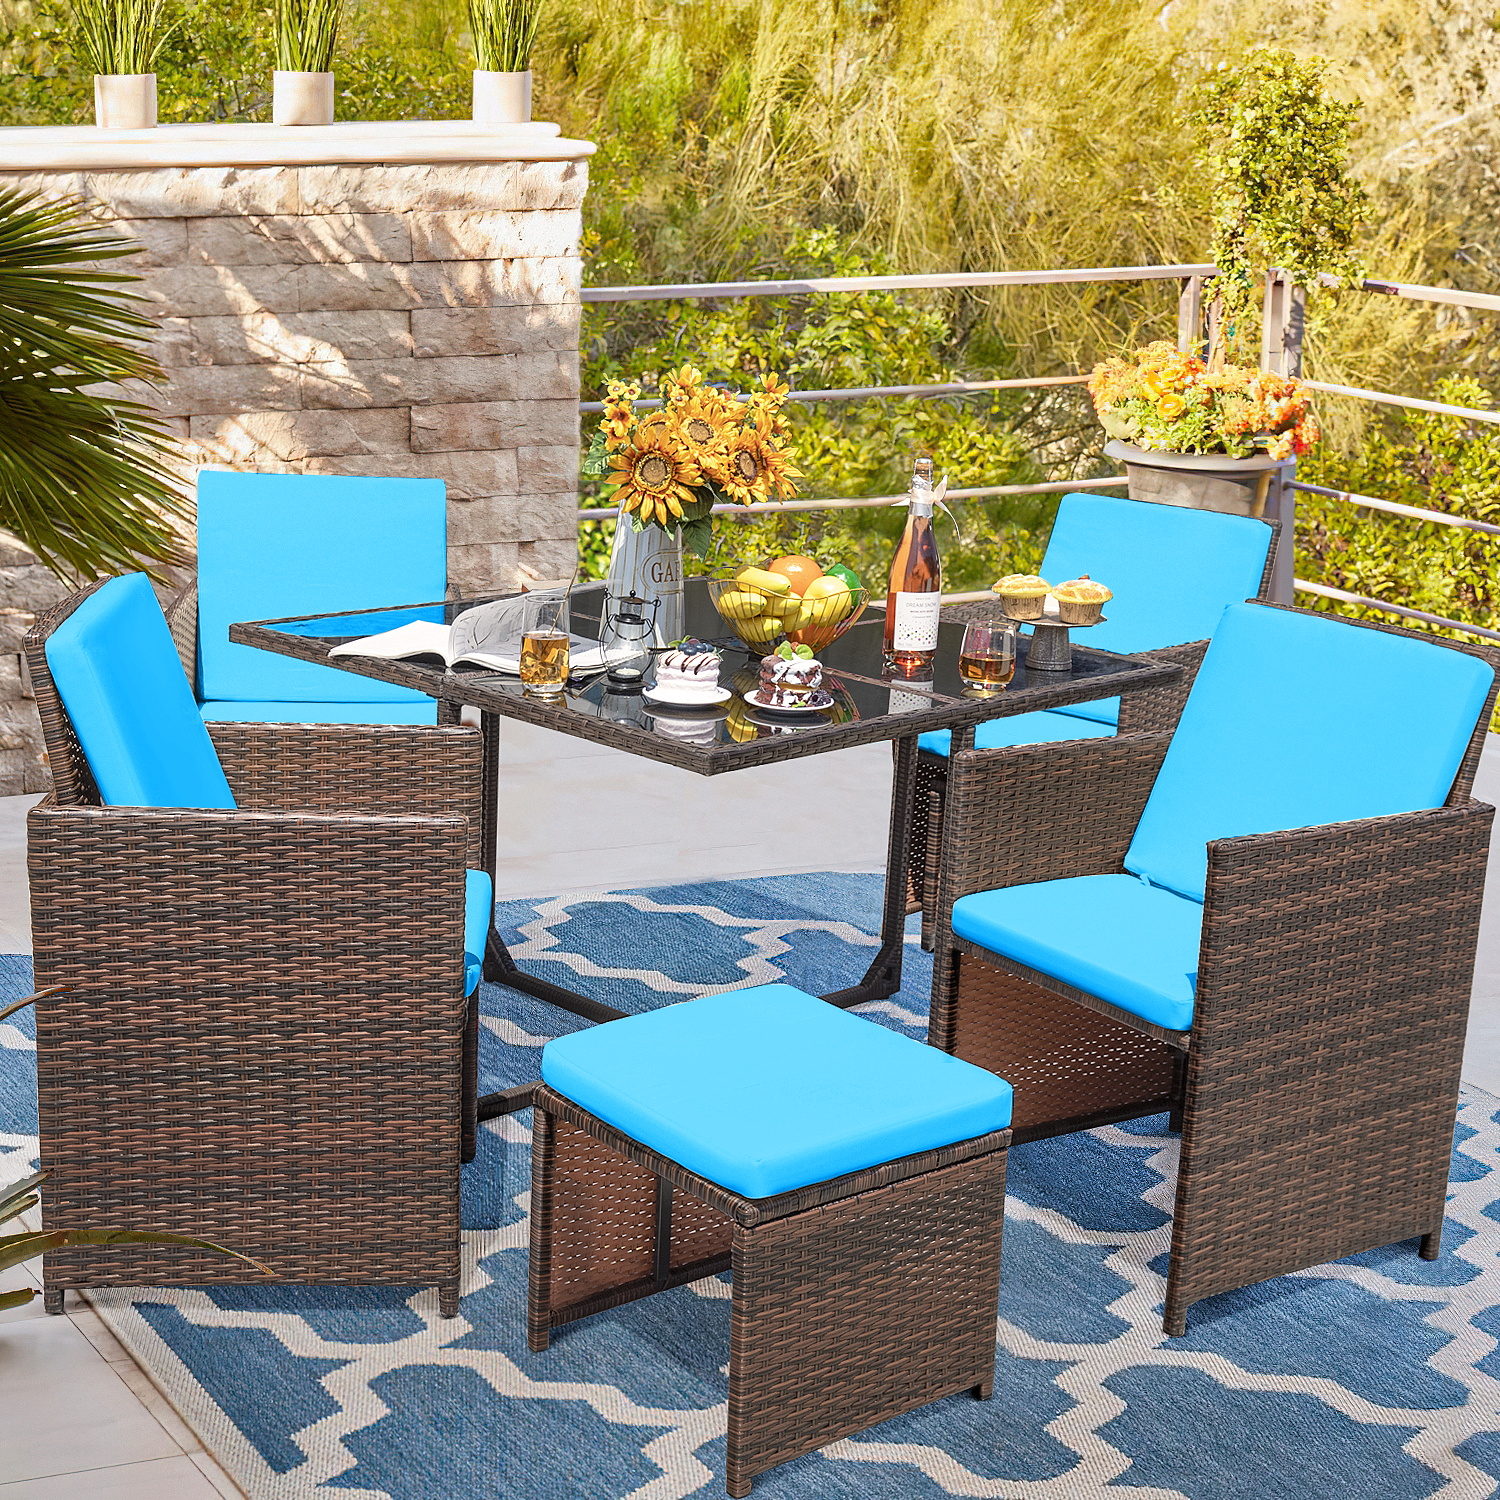 Lacoo 9 Pieces Patio Indoor Dining Sets Outdoor Furniture Patio Wicker Rattan Chairs and Tempered Glass Table Sectional Set Conversation Set Cushioned with Ottoman, Blue, 8 - image 1 of 7